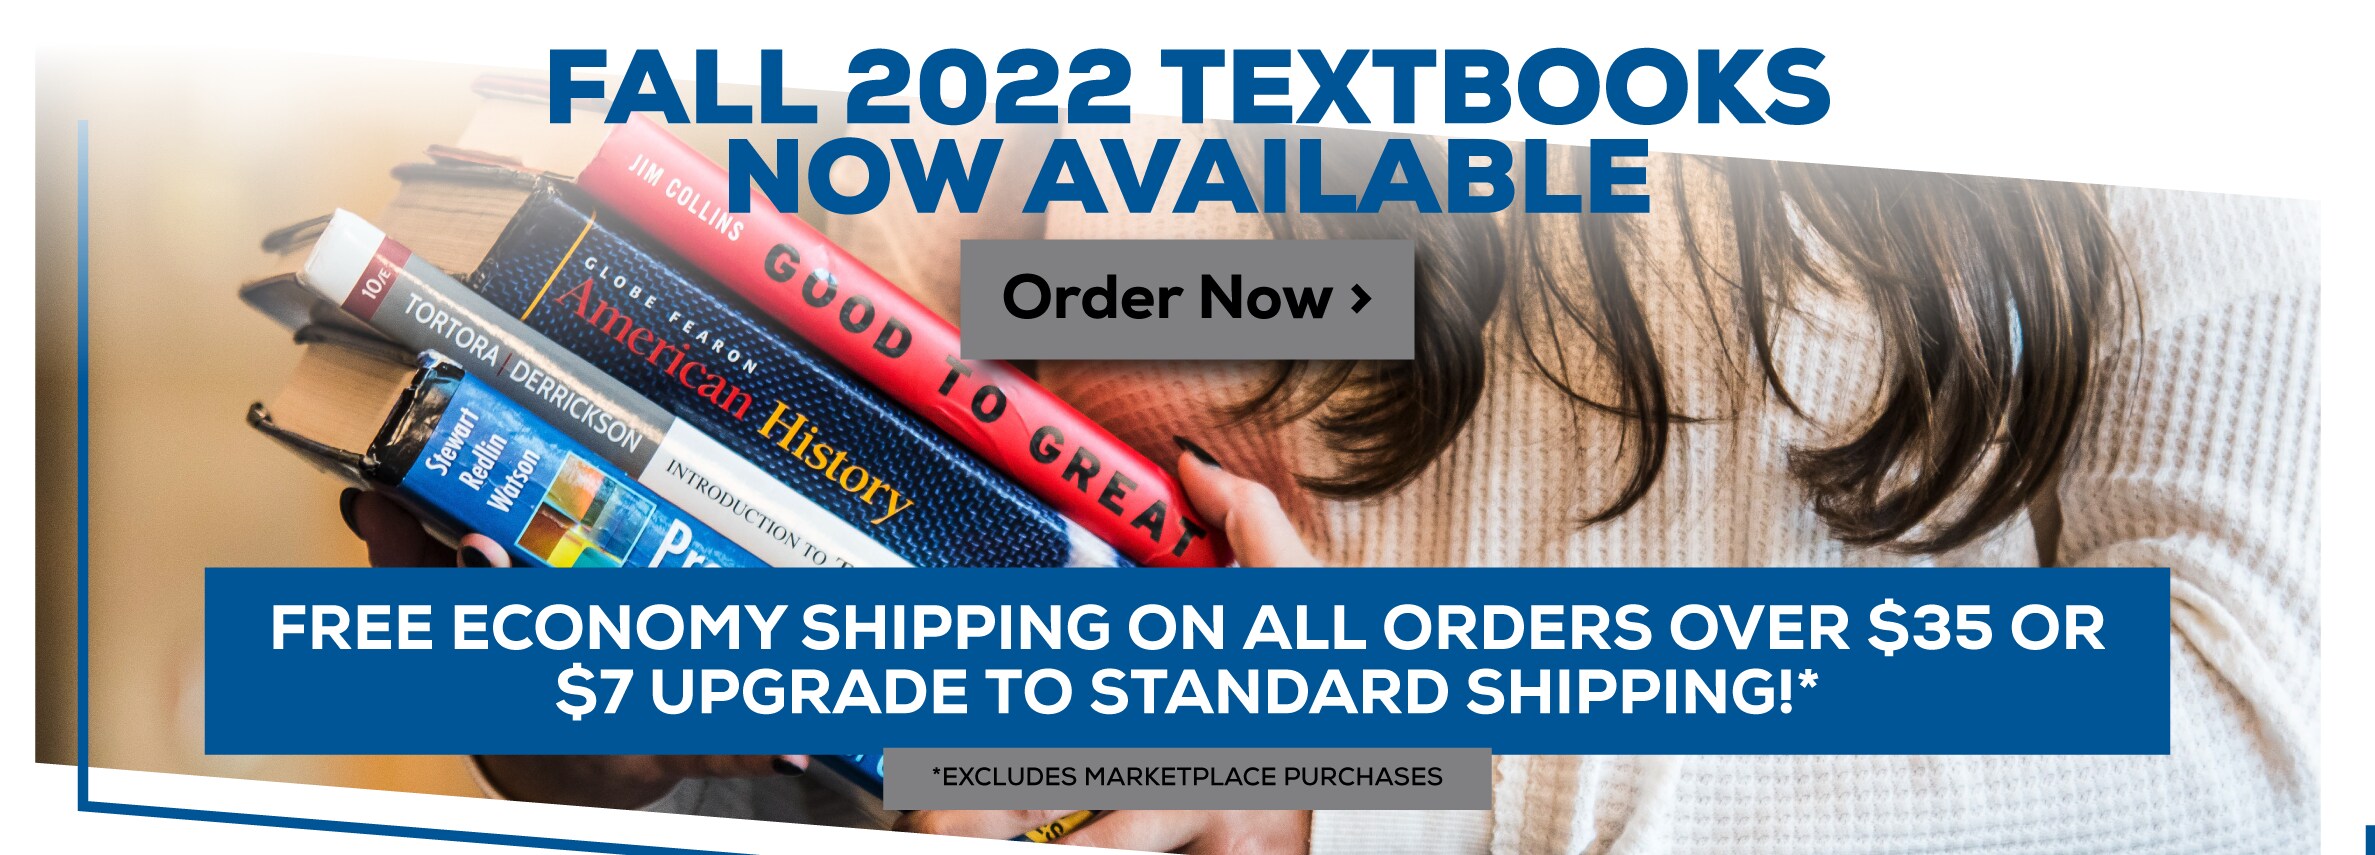 Fall 2022 Textbooks Now Available. Order Now. Free economy shipping on all orders over $35 or $7 upgrade to standard shipping!* *Excludes marketplace purchases